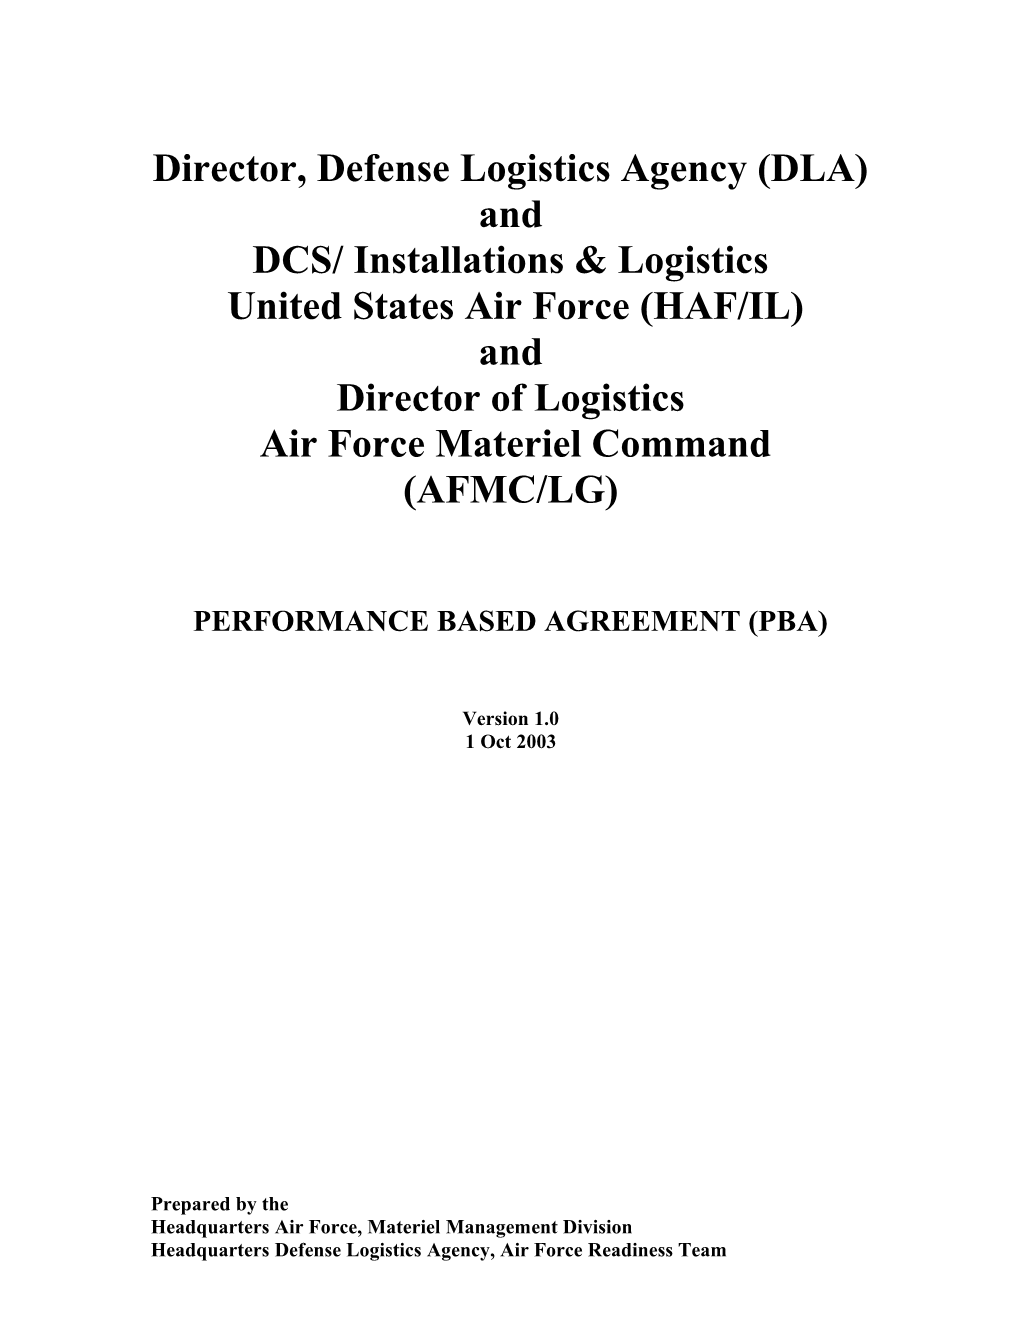 Performance Based Agreement PBA Between DLA-Headquarters Air Force Installations and Logistics